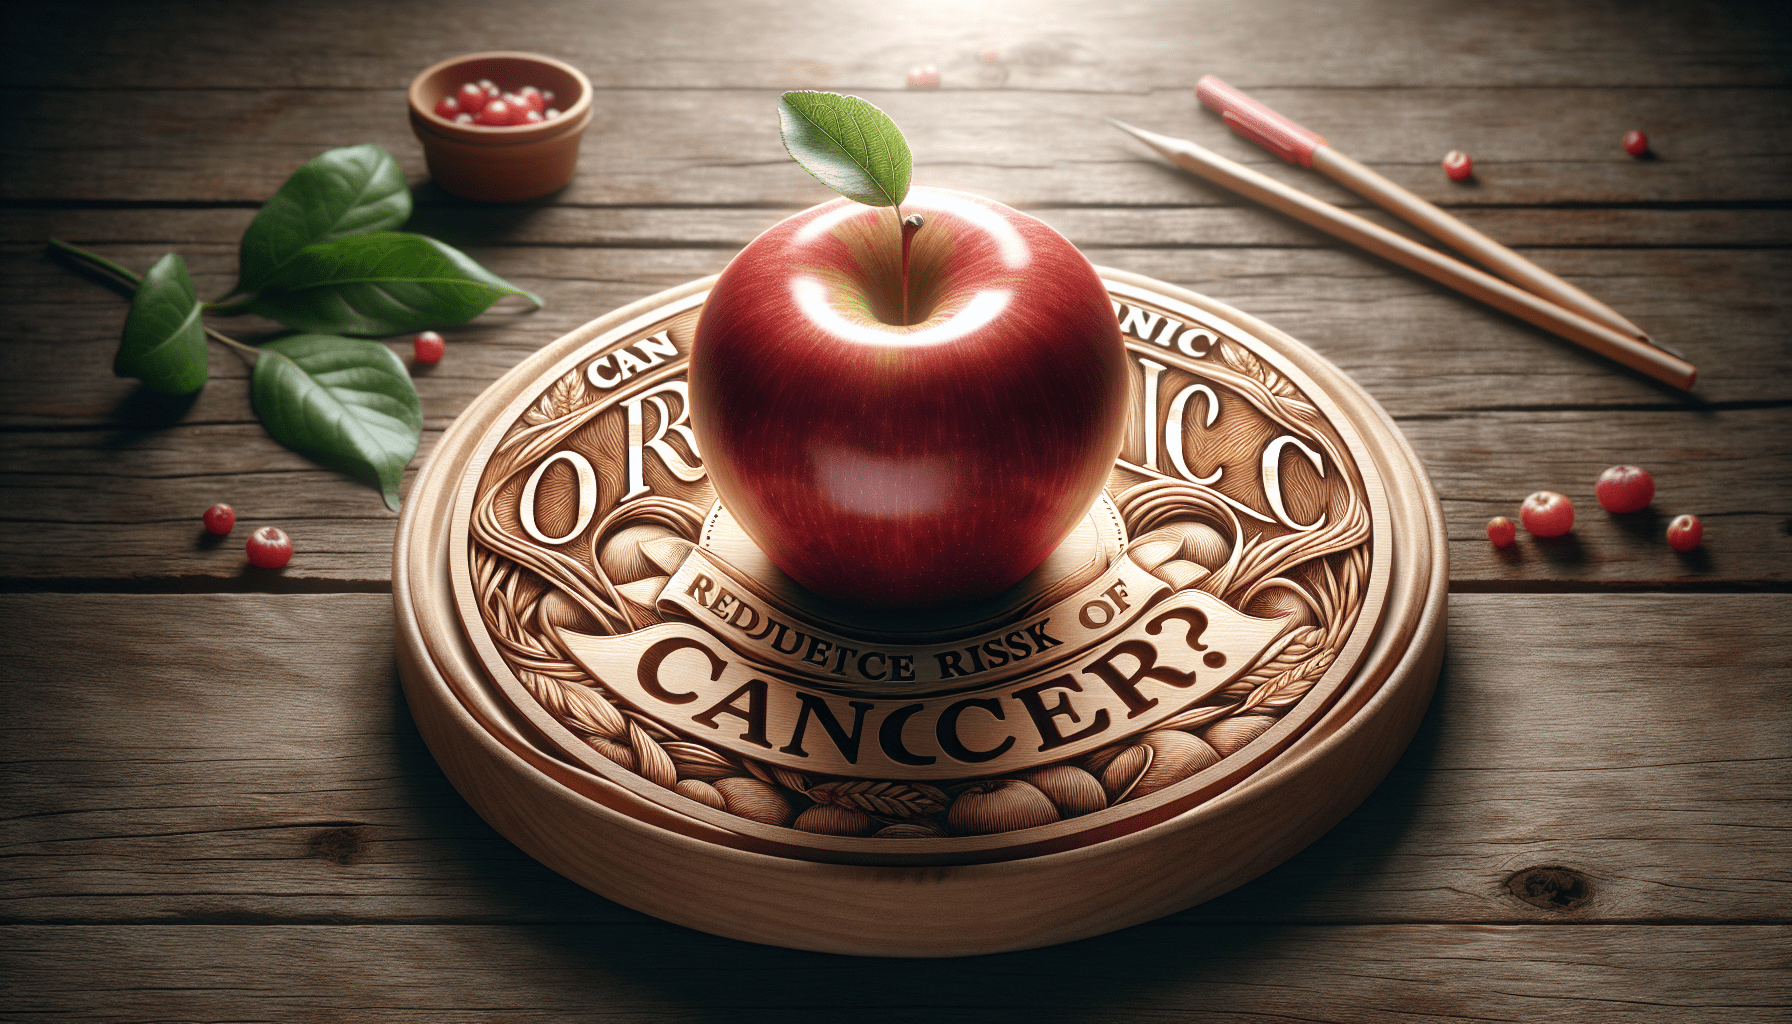 Can Organic Food Reduce the Risk of Cancer?